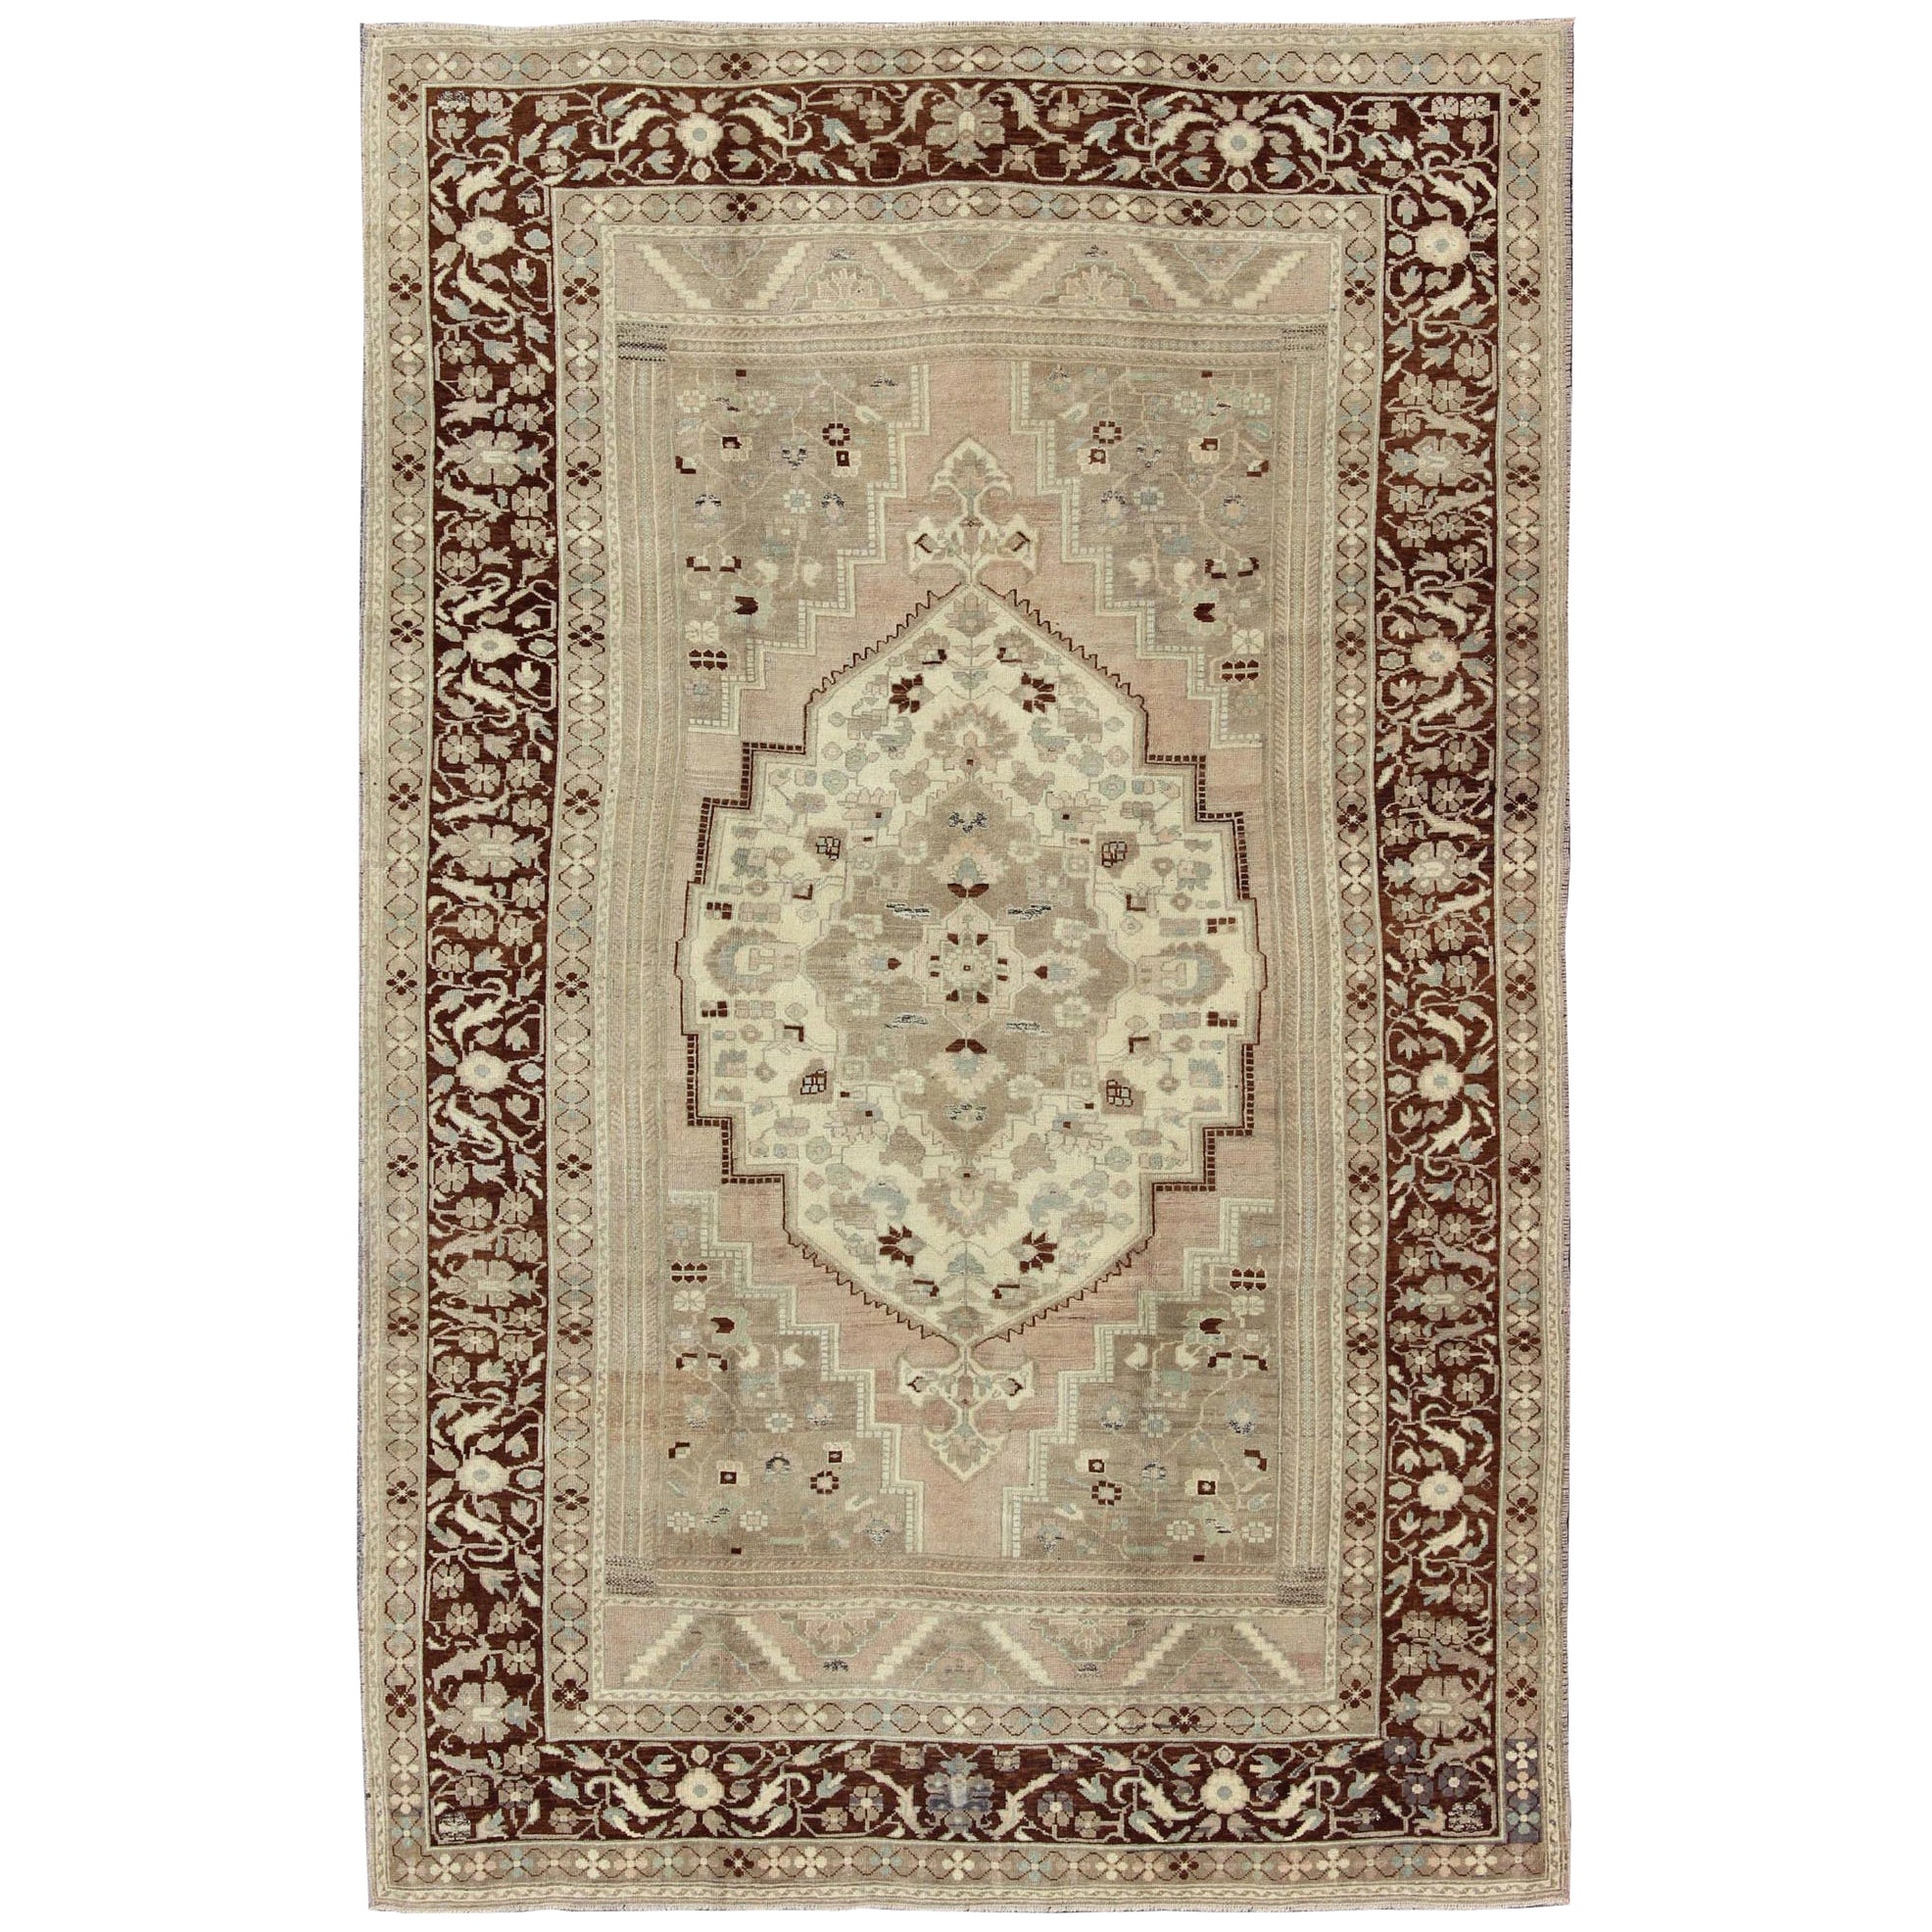 Charming Vintage Oushak Rug in Brown Border, Taupe, Blush and Gray/Green